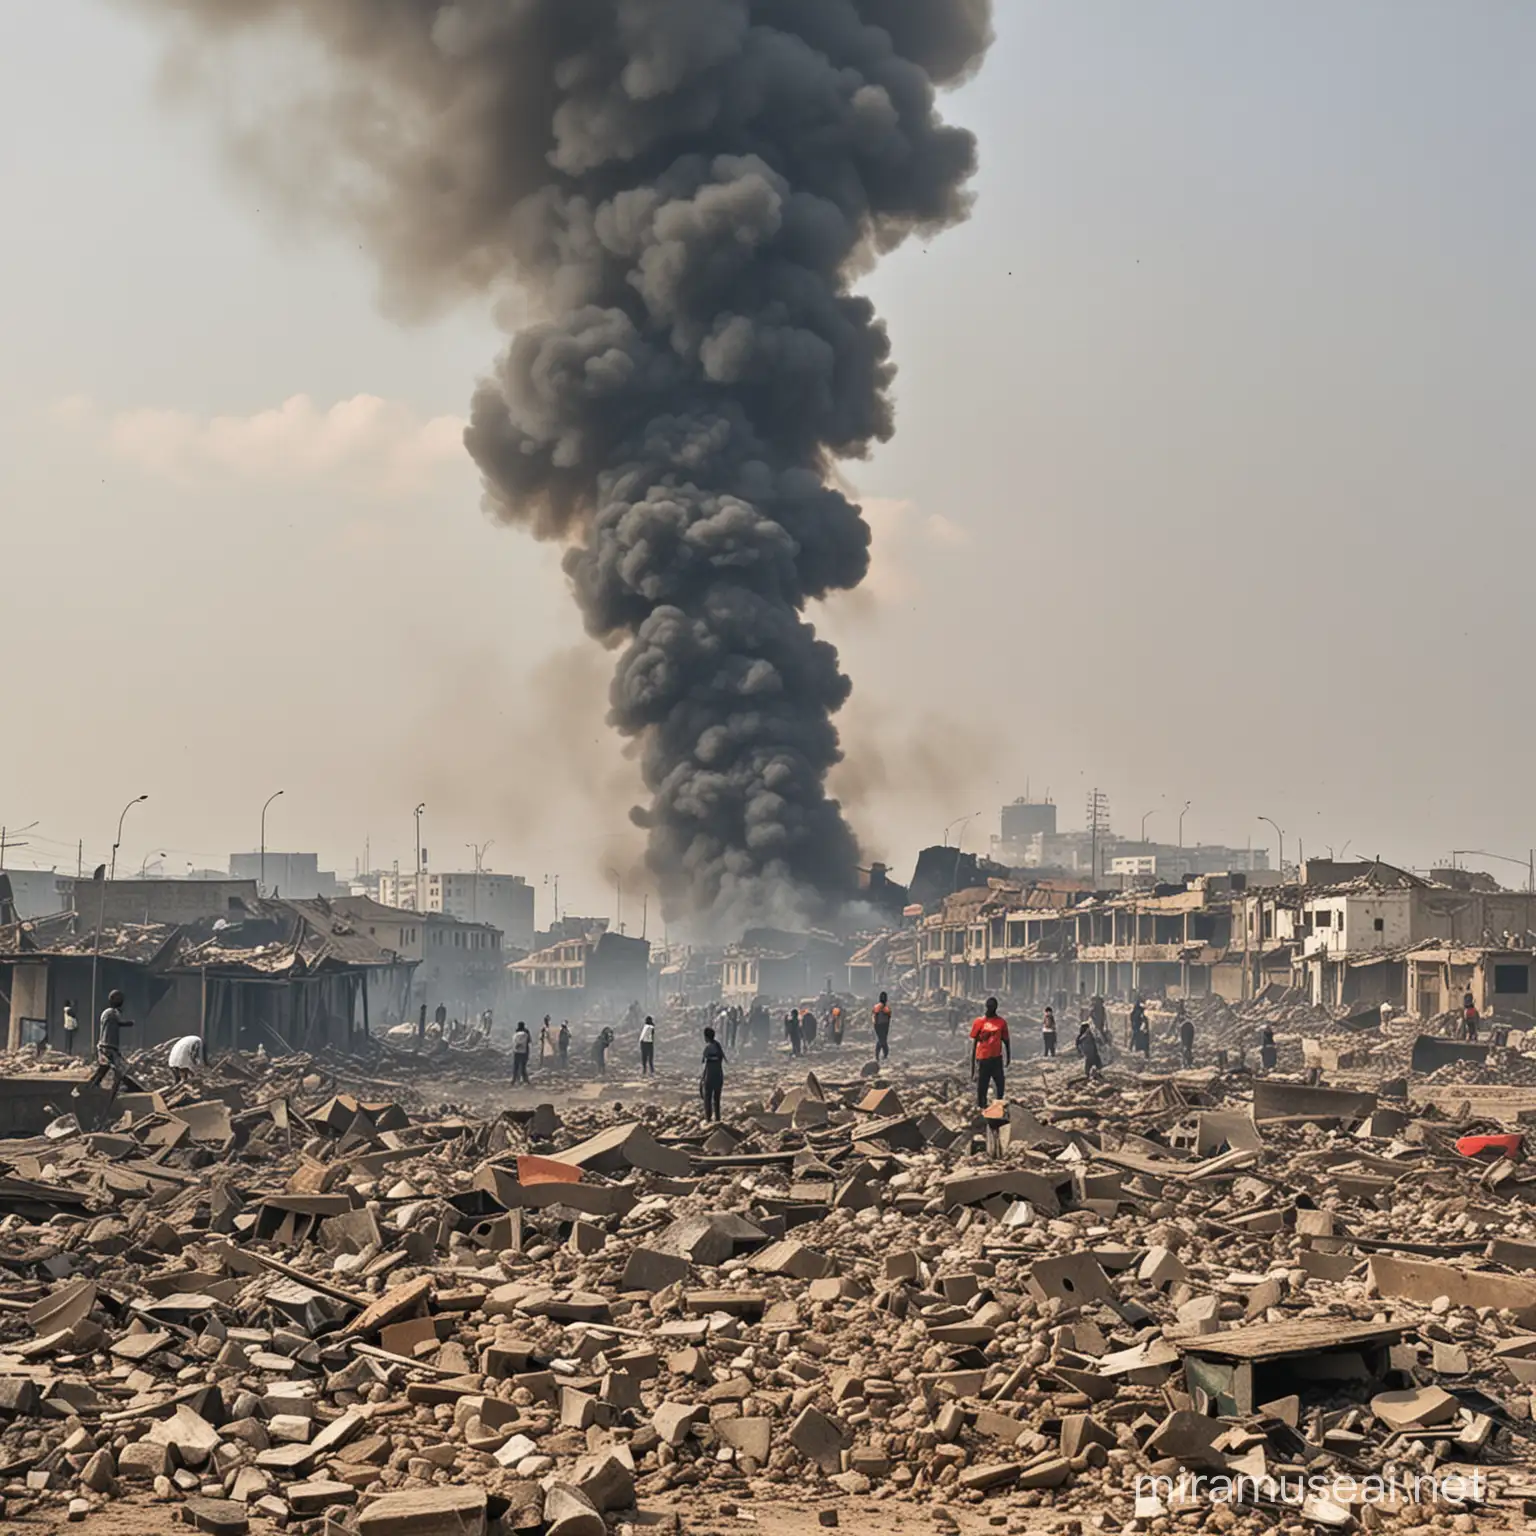 City of Lagos, Nigeria in smoking, burning, rubble of ruins EVERYWHERE.